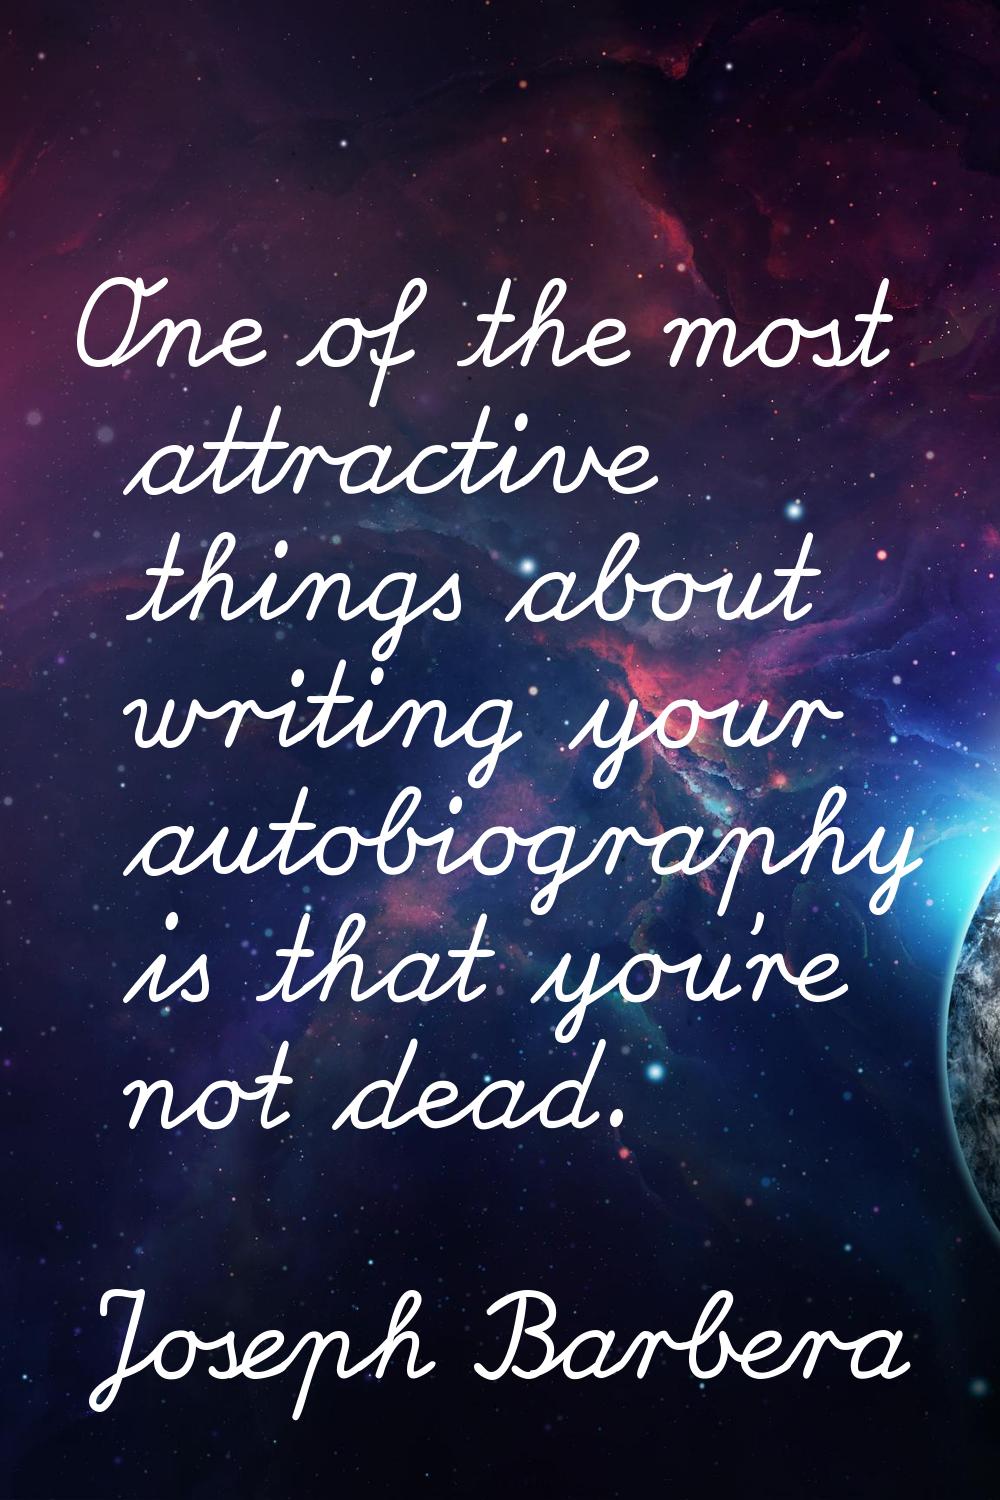 One of the most attractive things about writing your autobiography is that you're not dead.